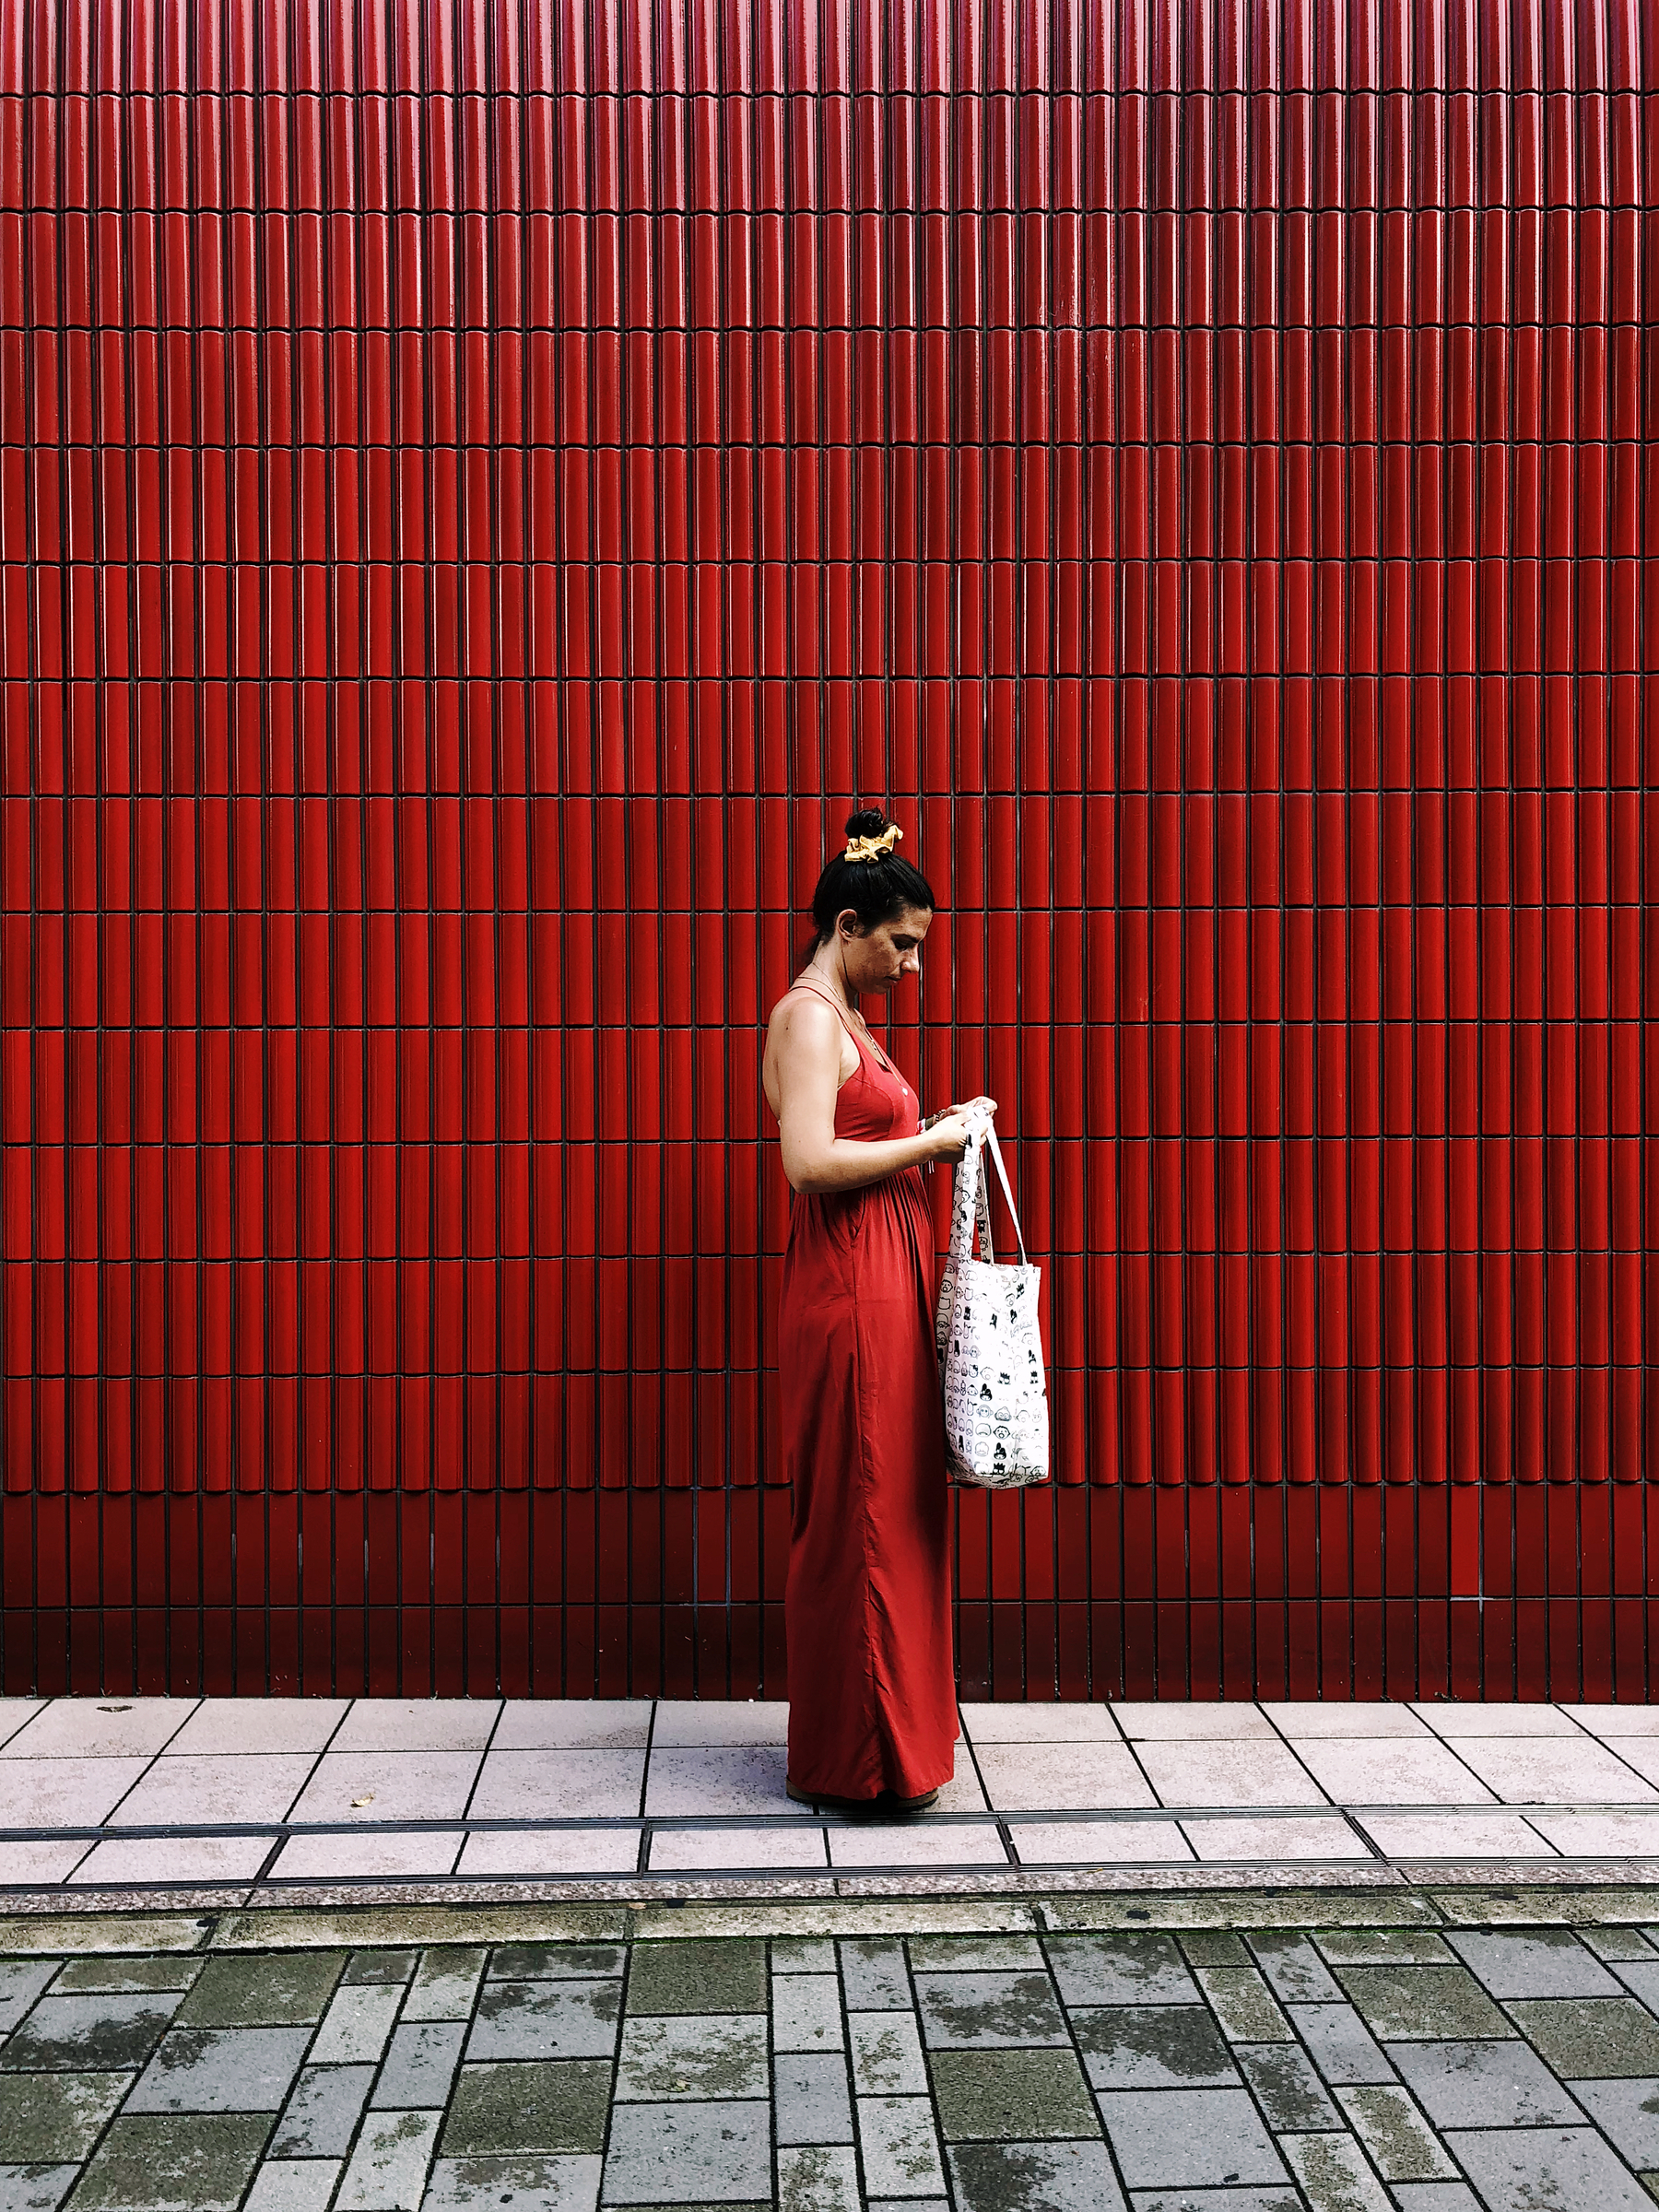 A woman wearing a red dress, against a red wall.